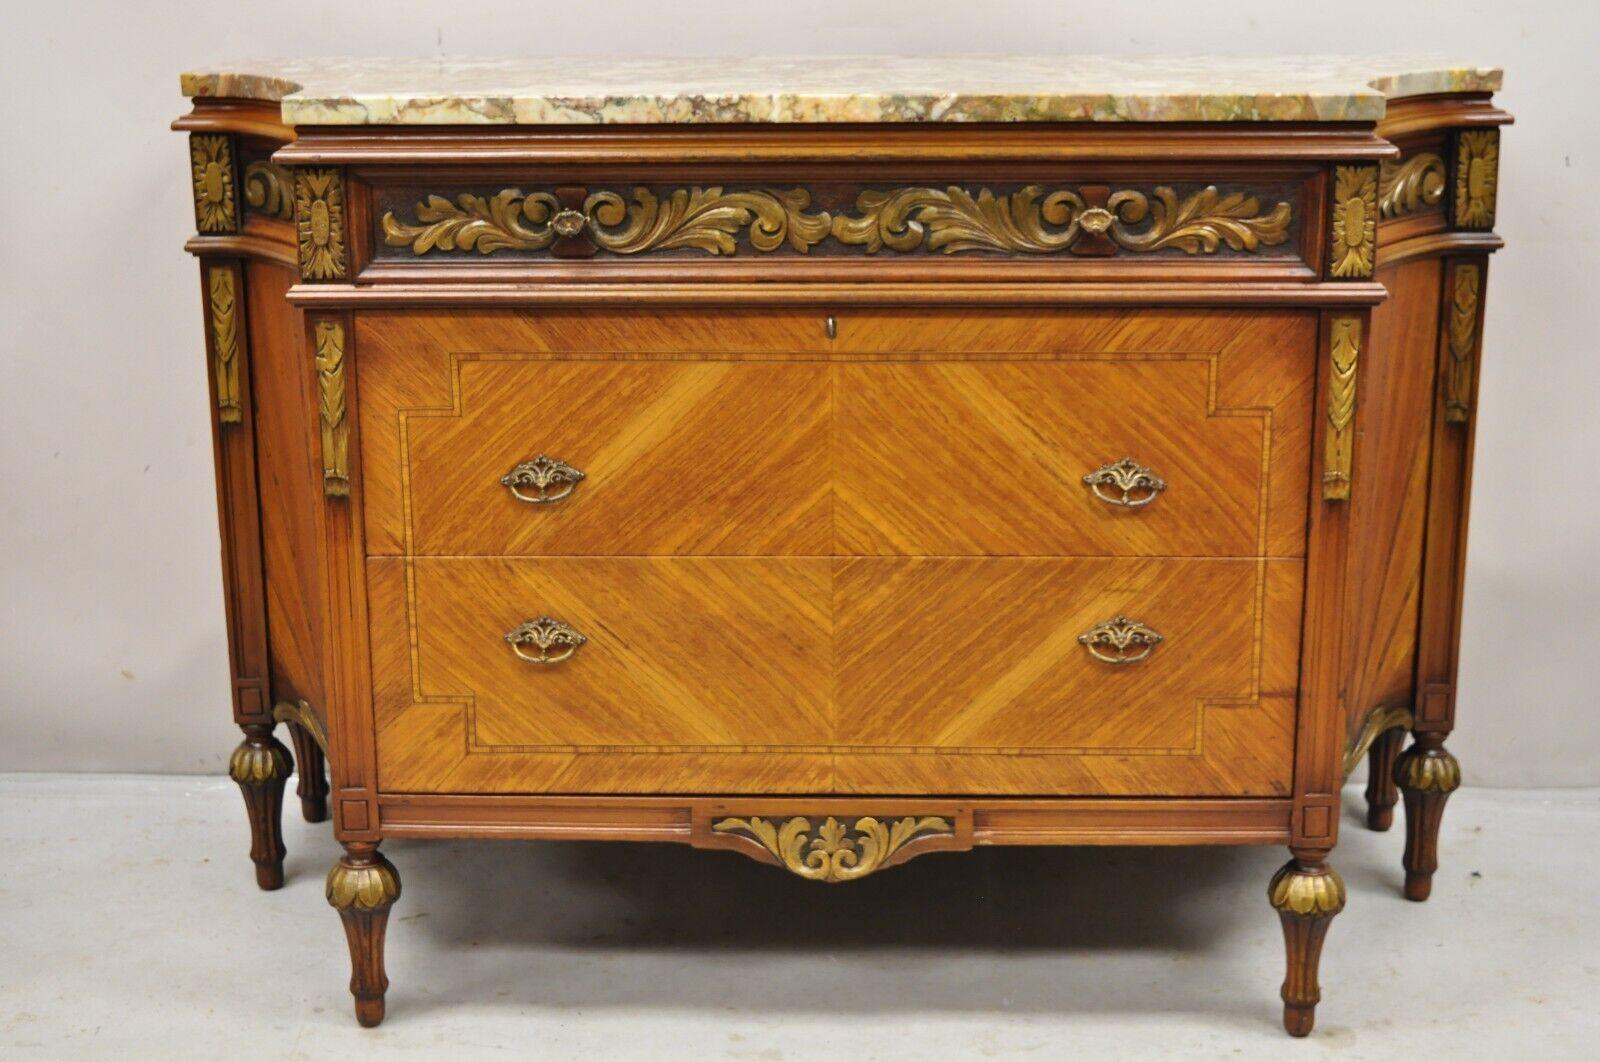 Antique French Louis XVI Style Marble Top Satinwood Demilune Dresser Commode. Item  features a shaped rouge marble top, 6 legs, curved sides, satinwood mahogany case with sunburst inlay, 3 dovetailed drawers, working lock and key, nicely carved gold